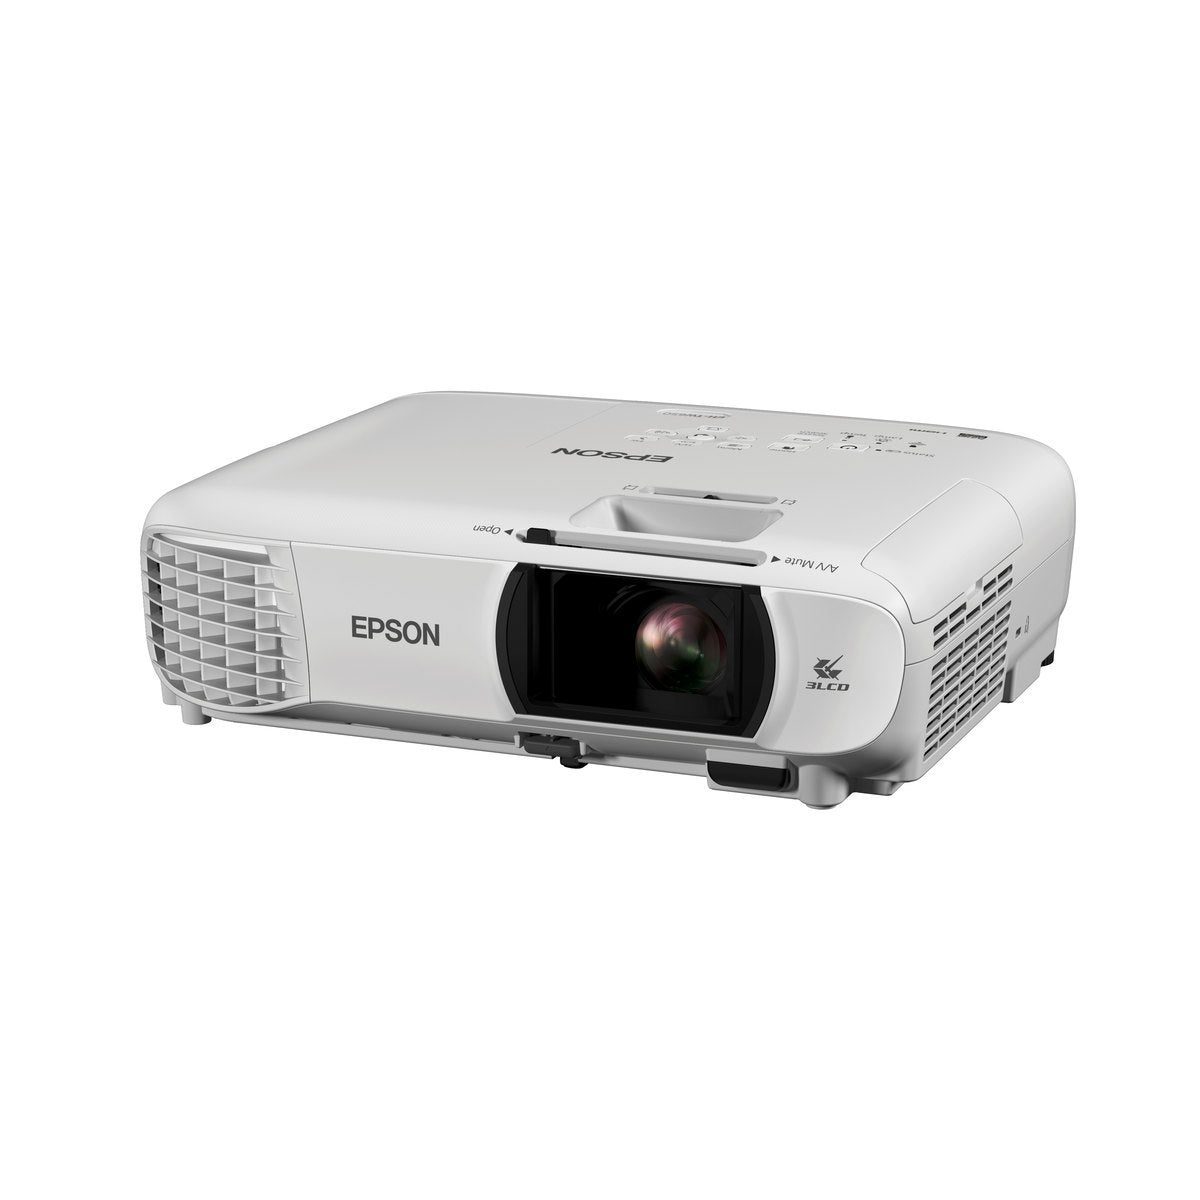 Epson EH-TW750 Full HD 1080p Home Cinema Projector